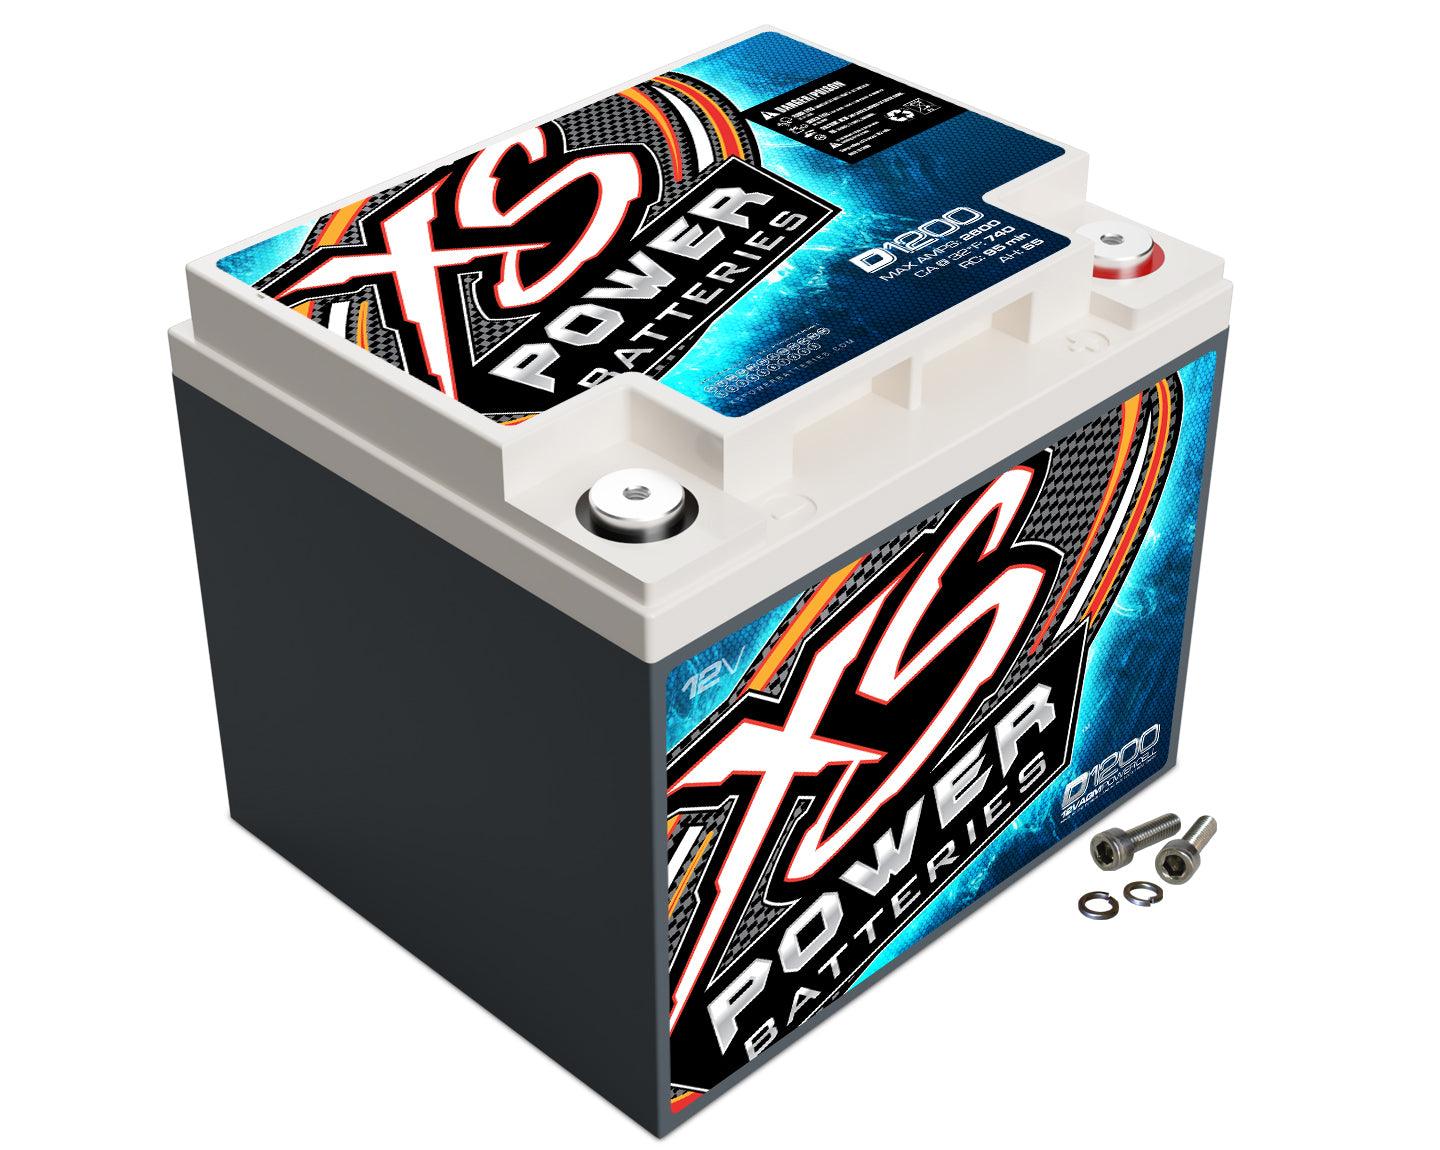 XS Power AGM Battery 12 Volt 740A CA - Burlile Performance Products